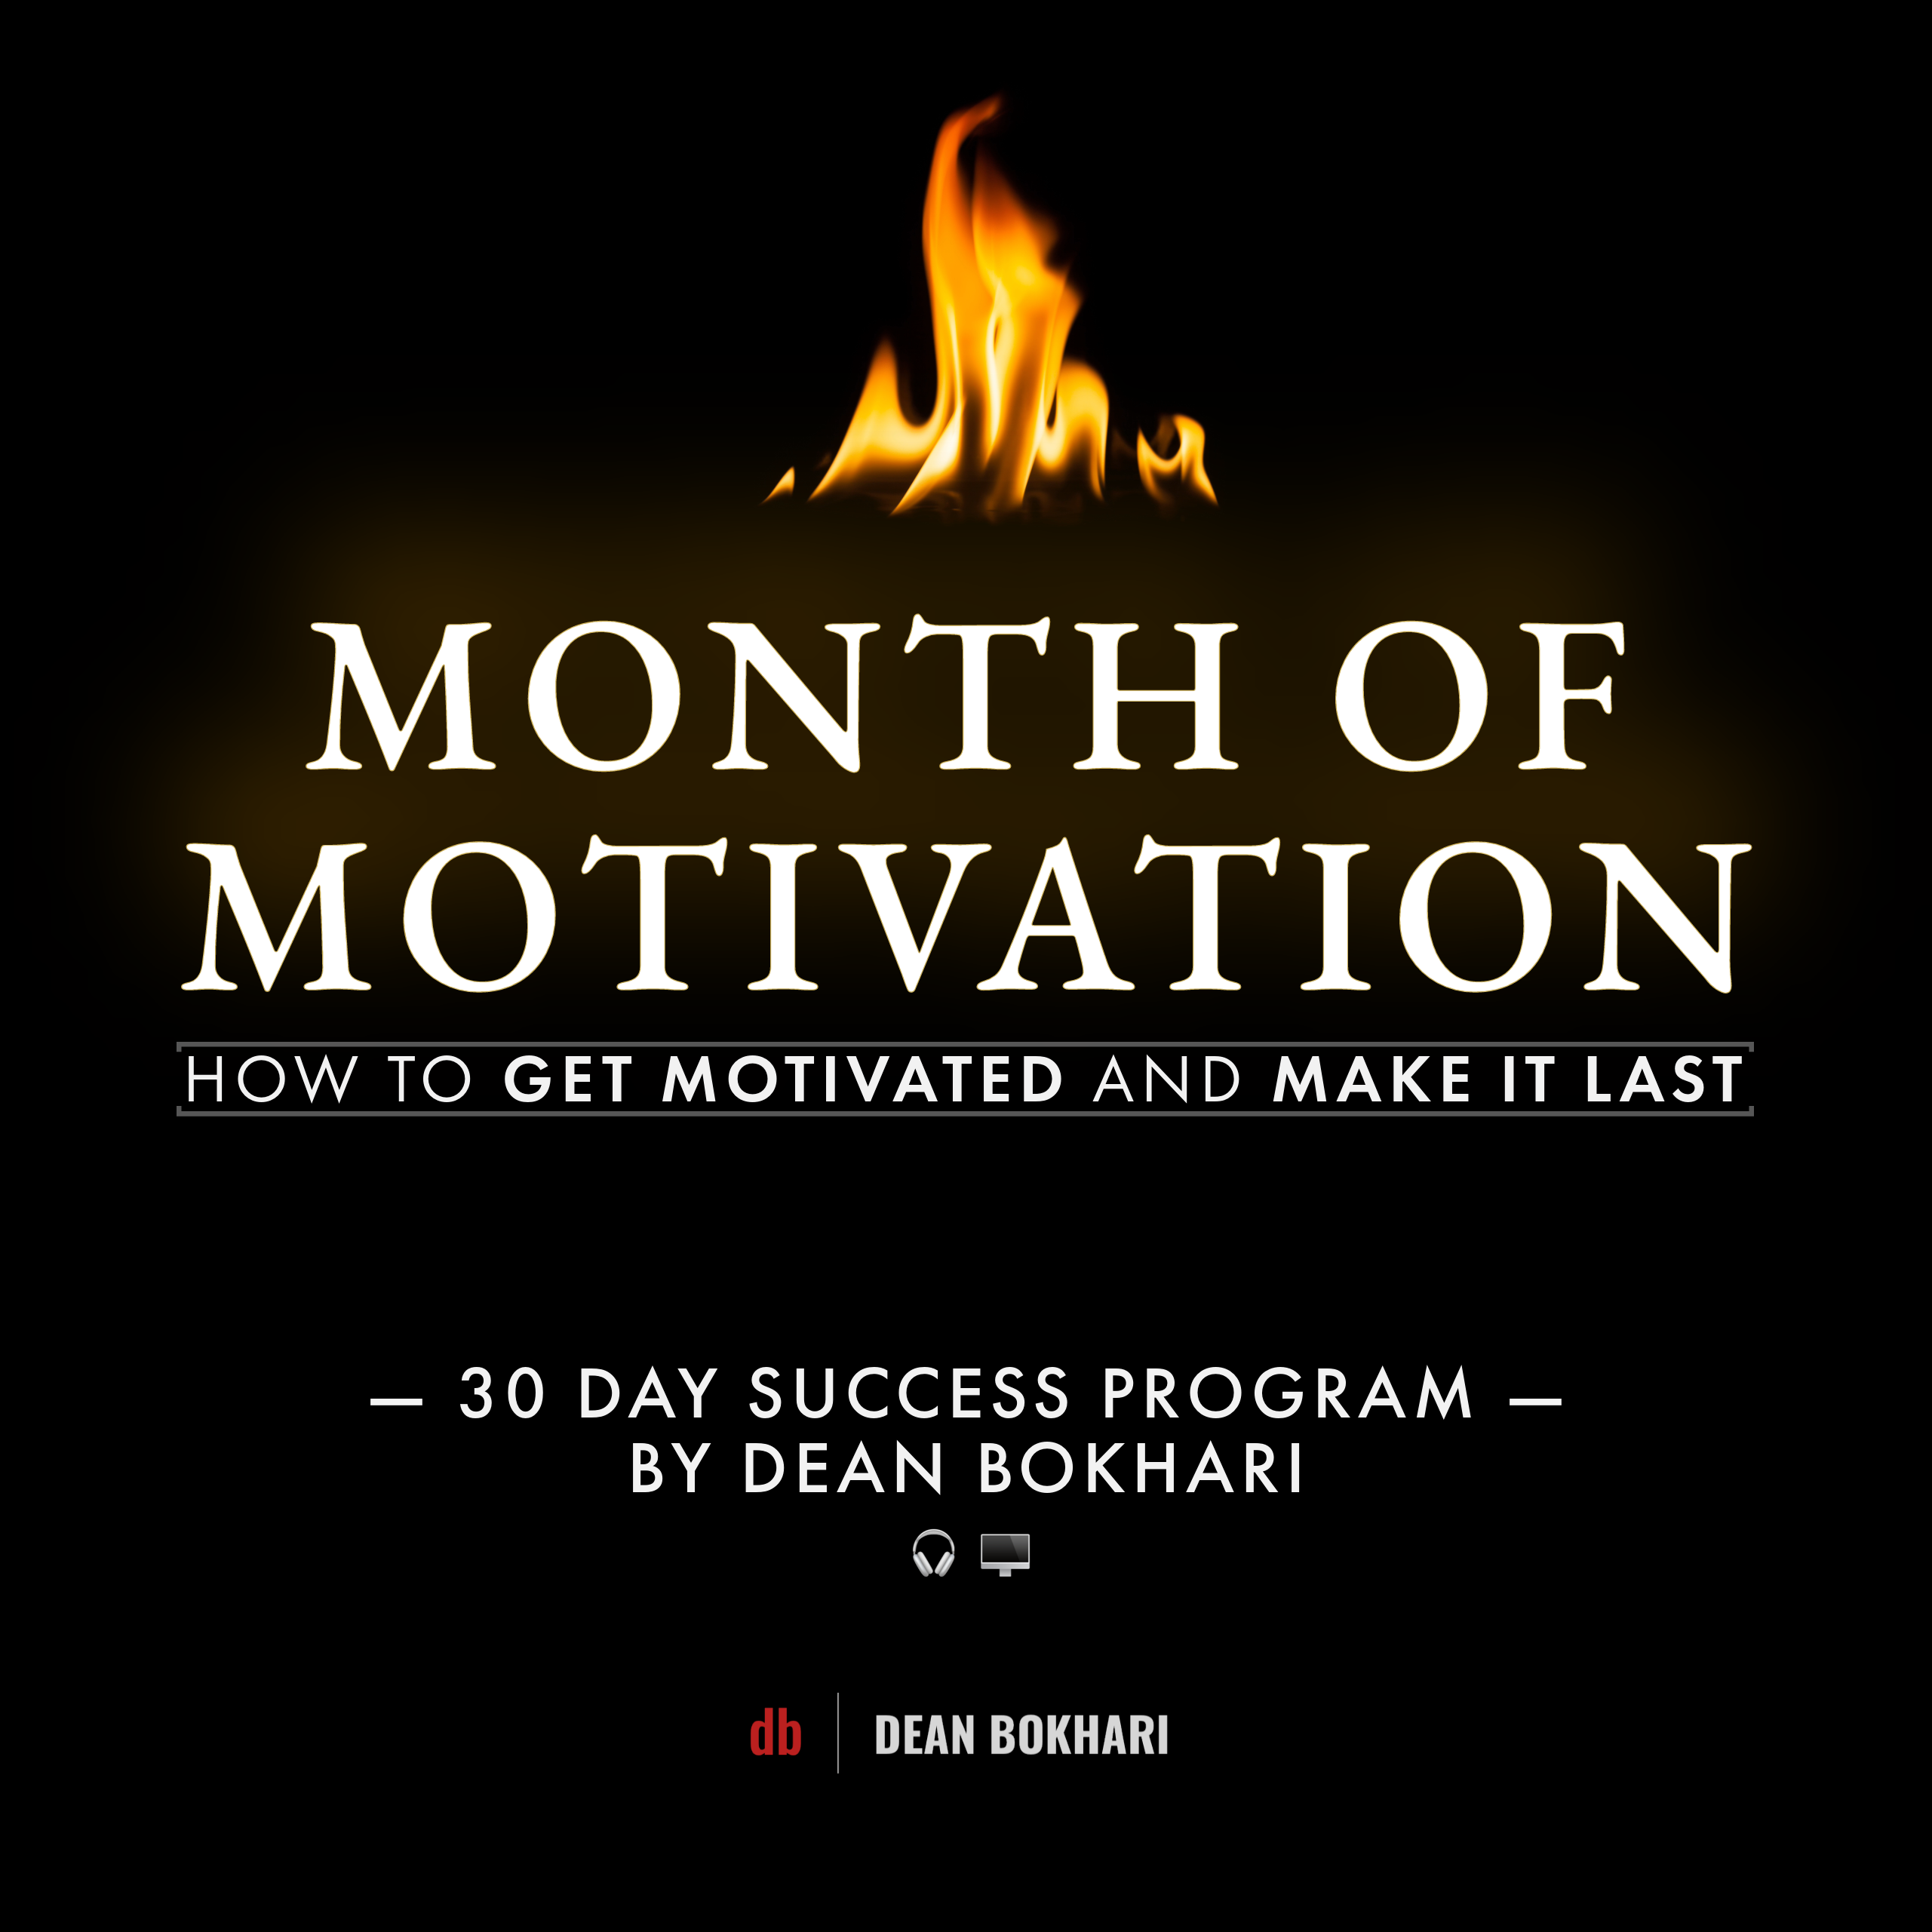 Month of Motivation by Dean Bokhari